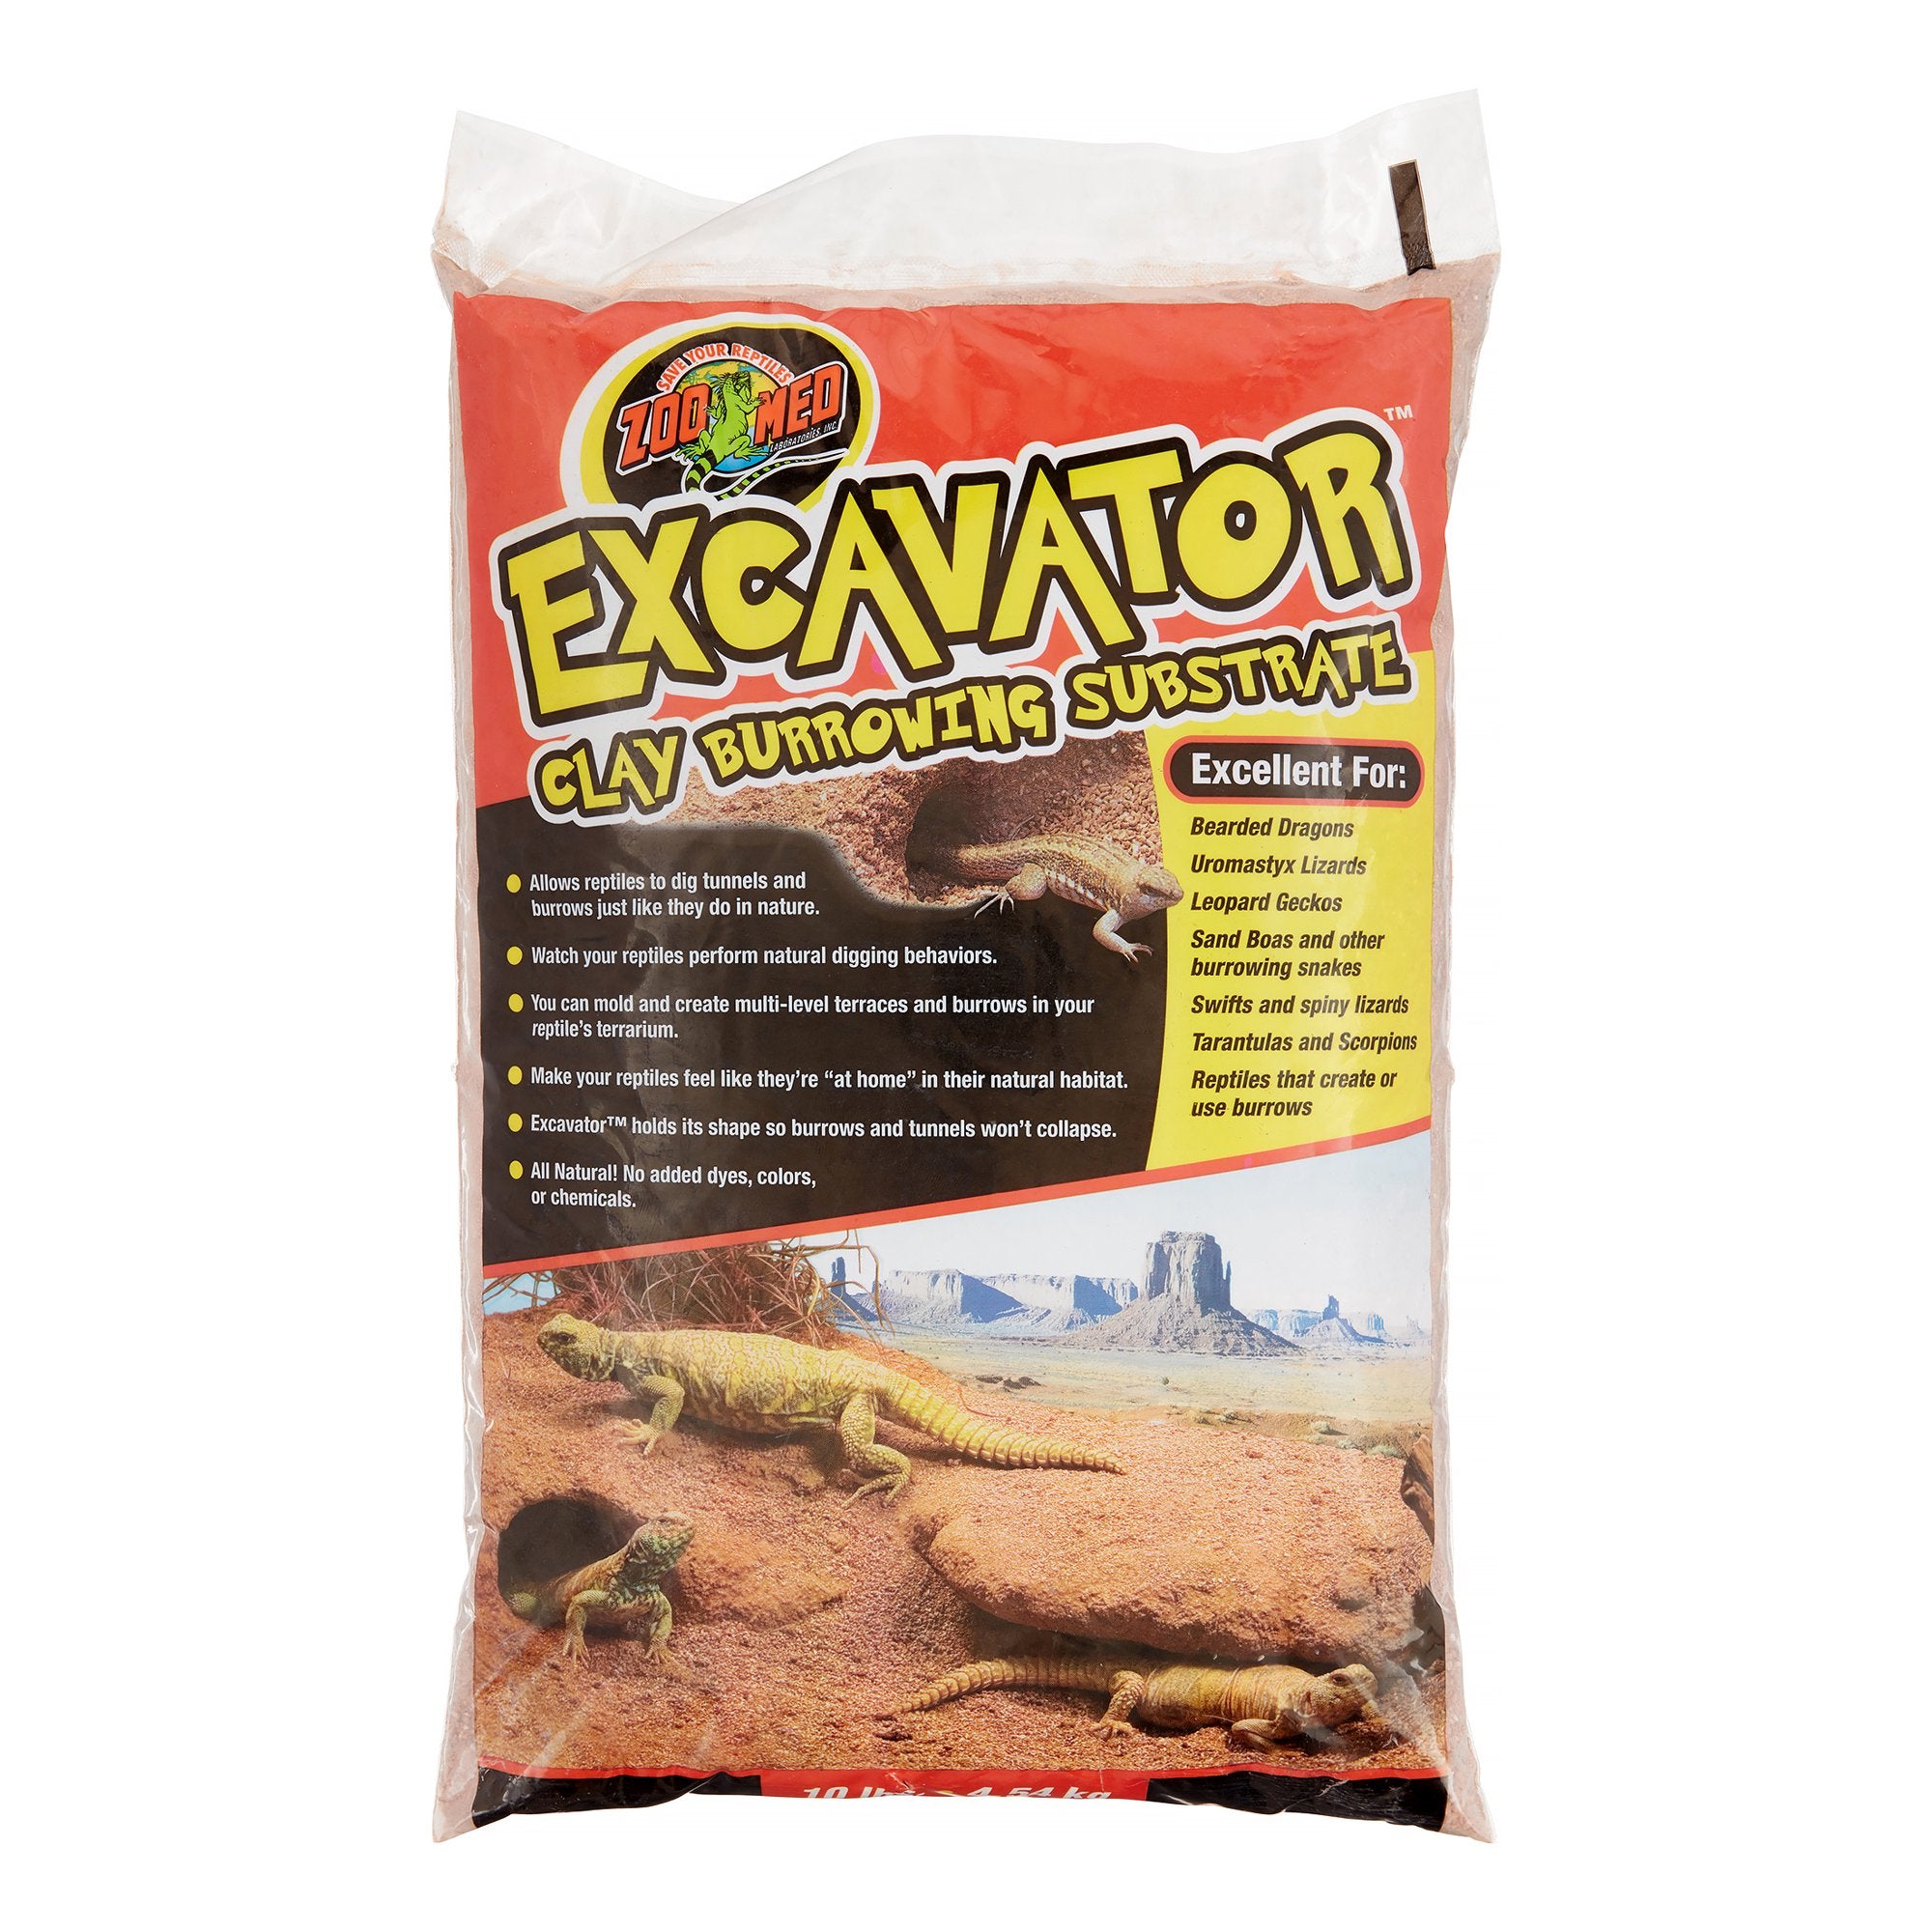 Excavator Clay Burrowing Substrate 10 LB